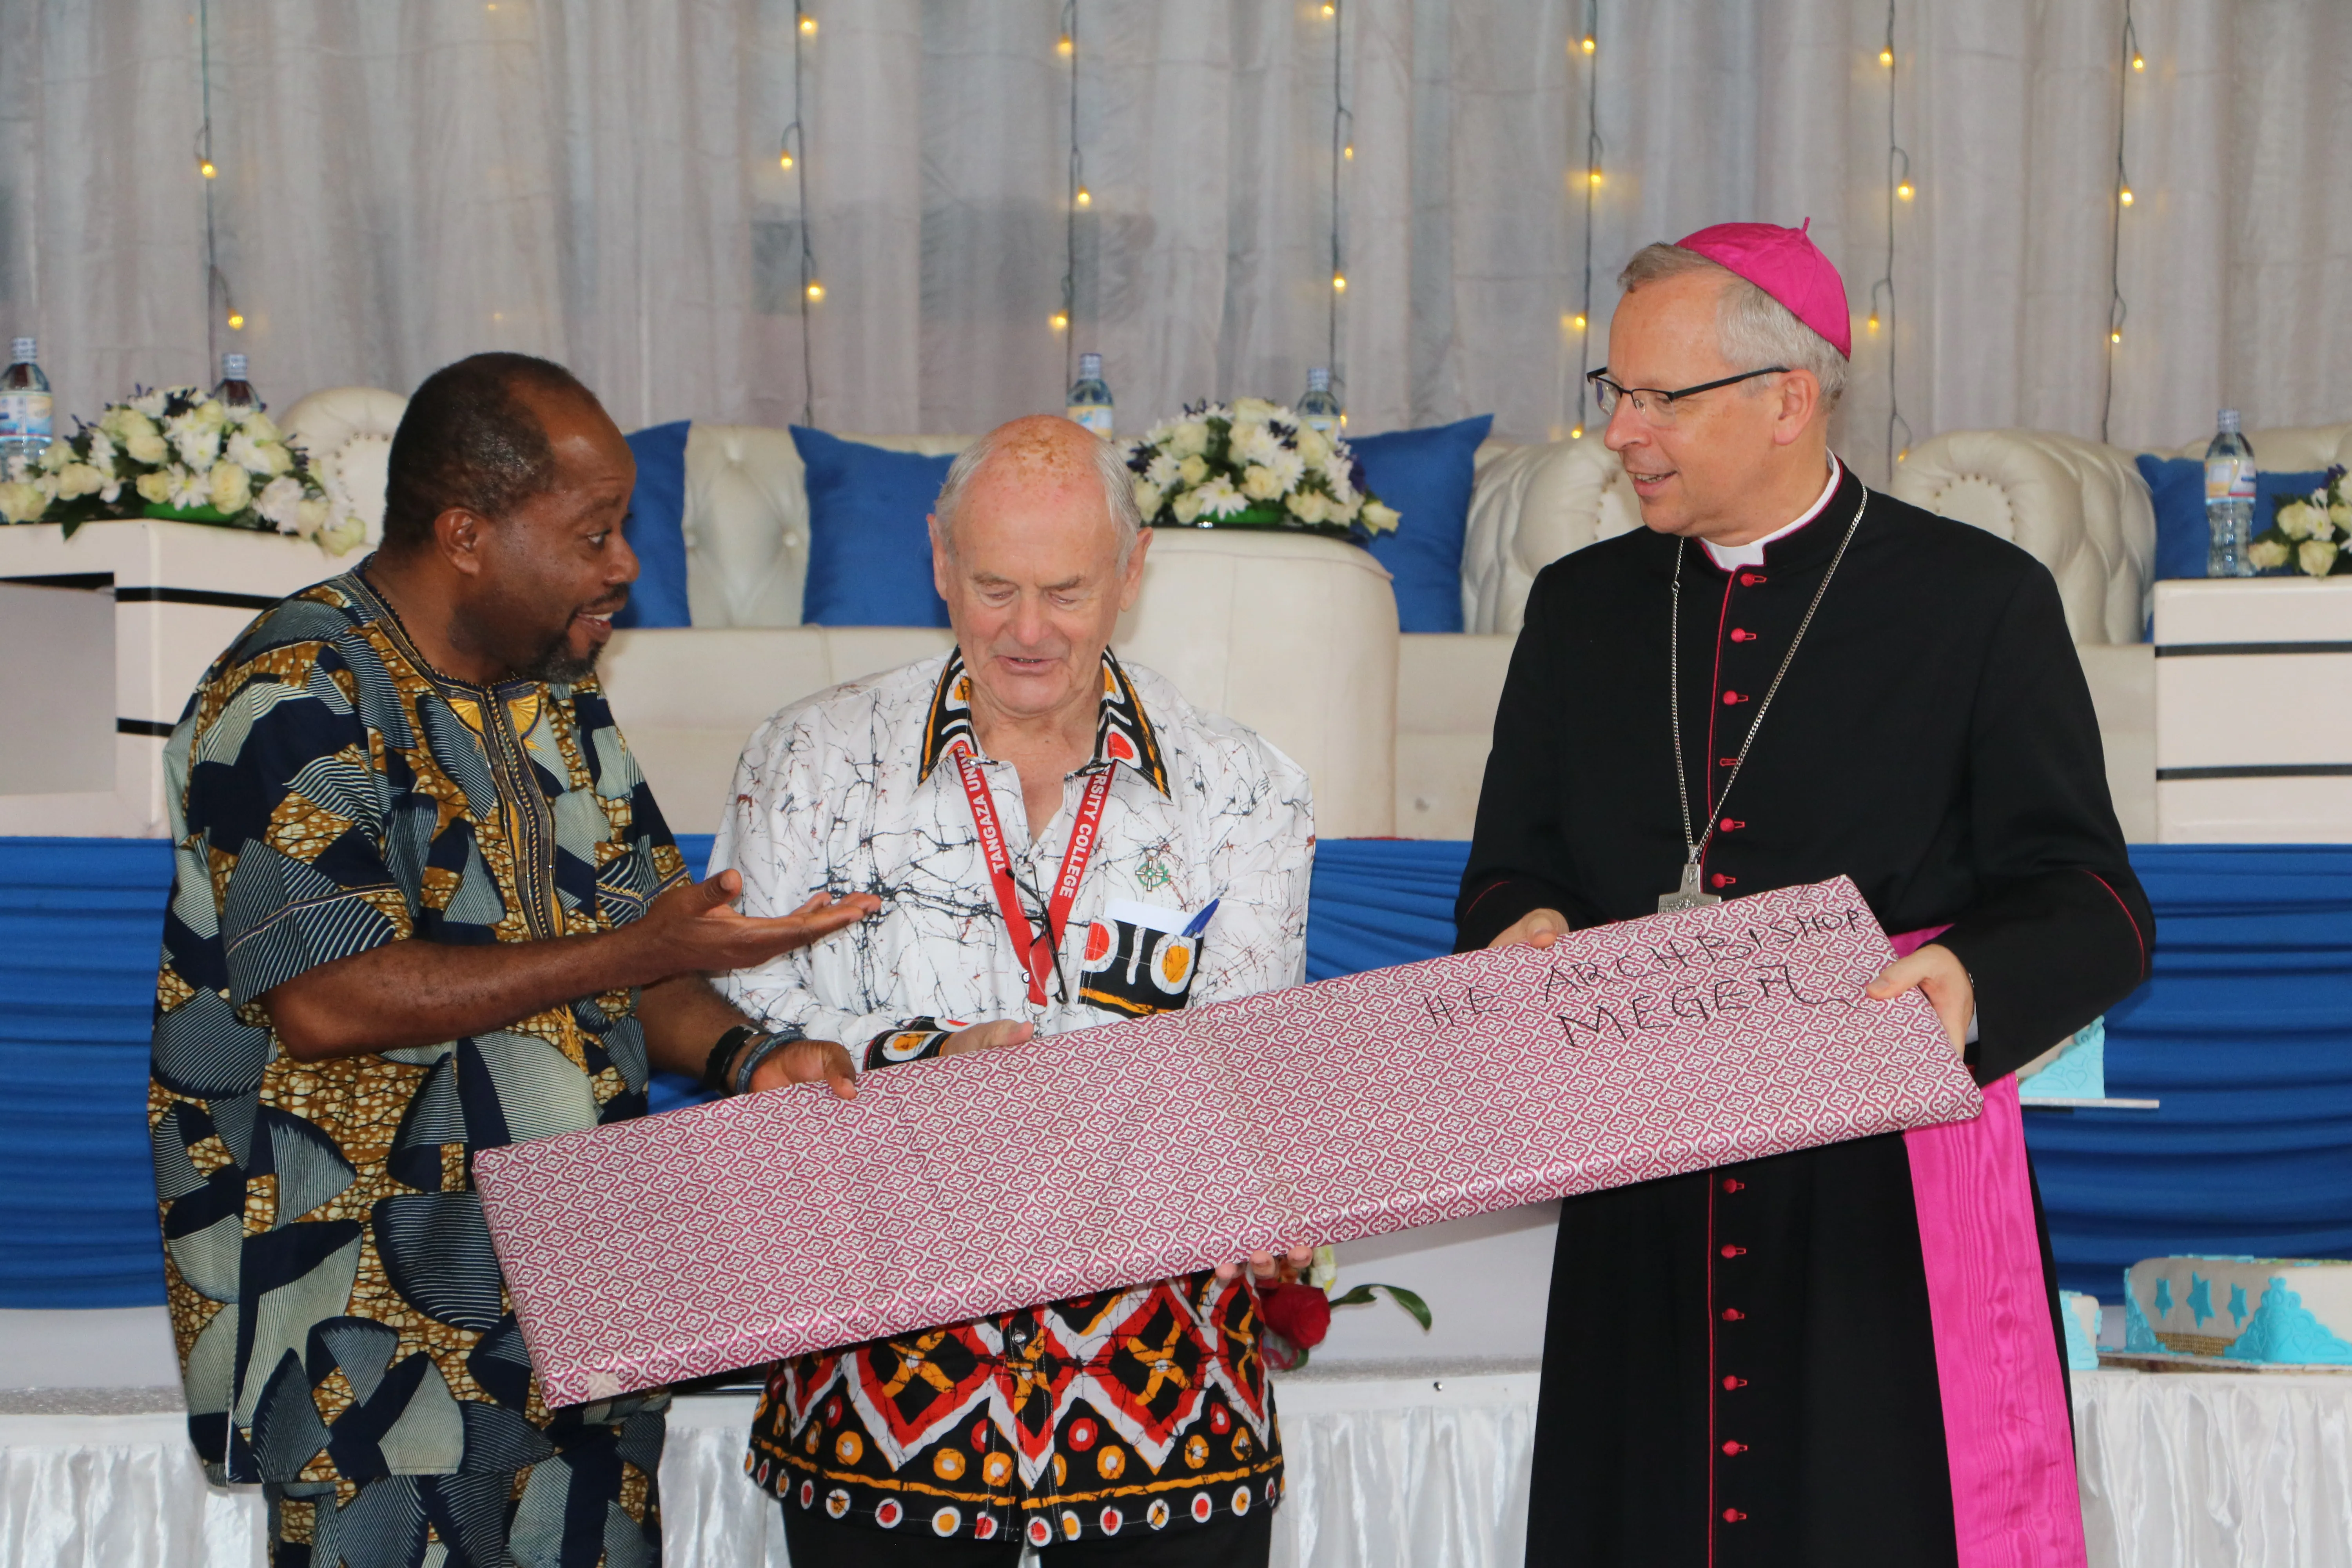 African-led Changes Best Suited for Social Transformation in Africa: Papal Nuncio in Kenya